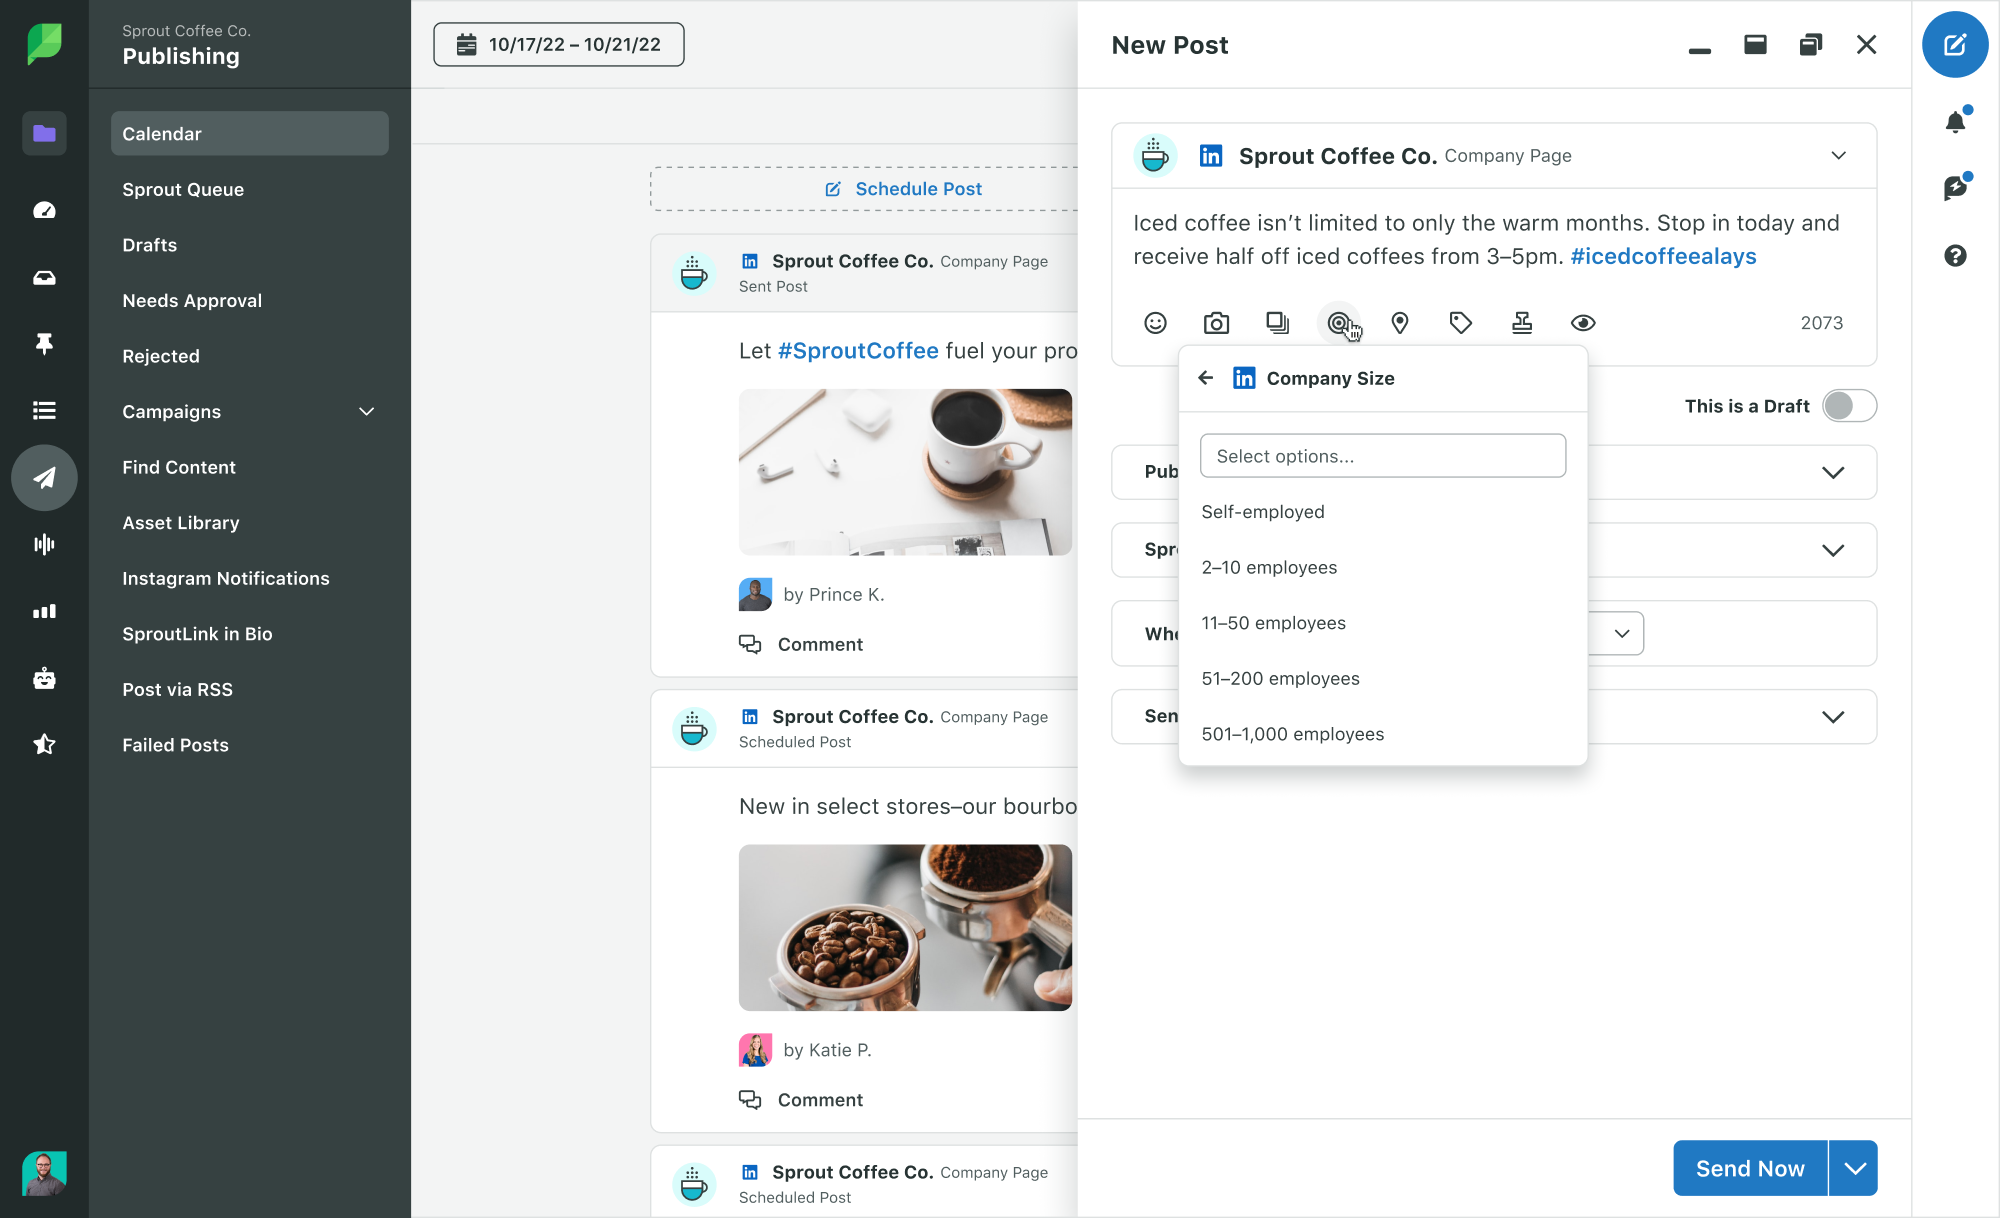 Sprout Social Product Image of Publishing Calendar List View with LinkedIn Targeting Compose